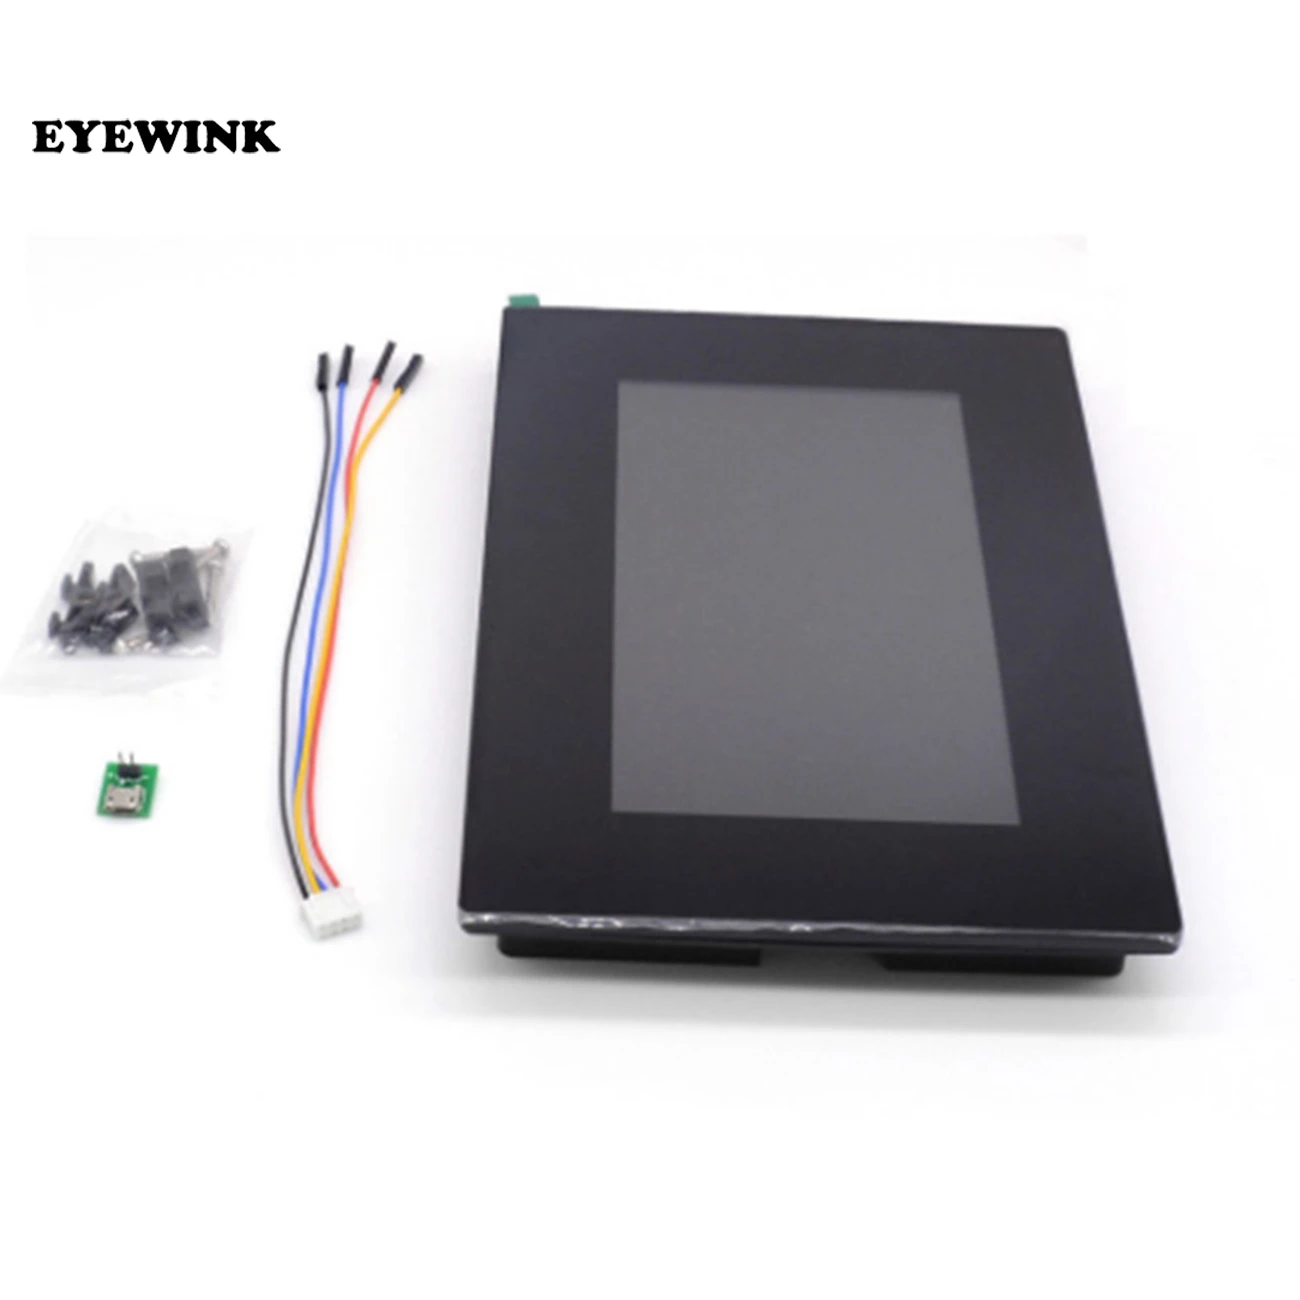 

7.0" Nextion Enhanced HMI Intelligent USART UART Serial TFT LCD Module Display Resistive or Capacitive Touch Panel w/Enclosure